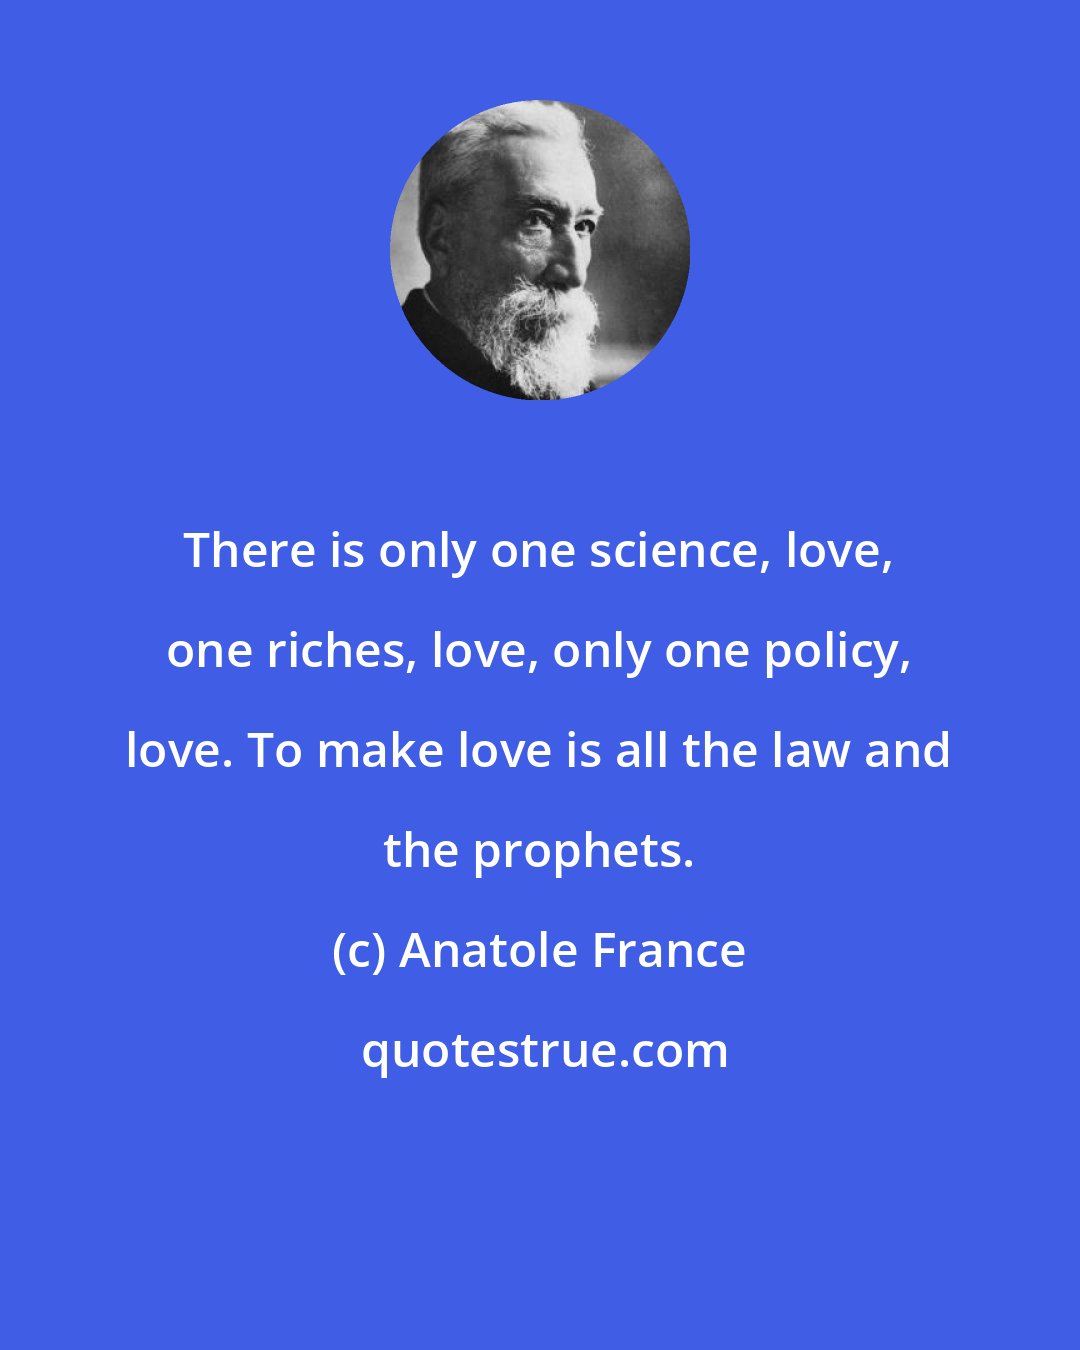 Anatole France: There is only one science, love, one riches, love, only one policy, love. To make love is all the law and the prophets.